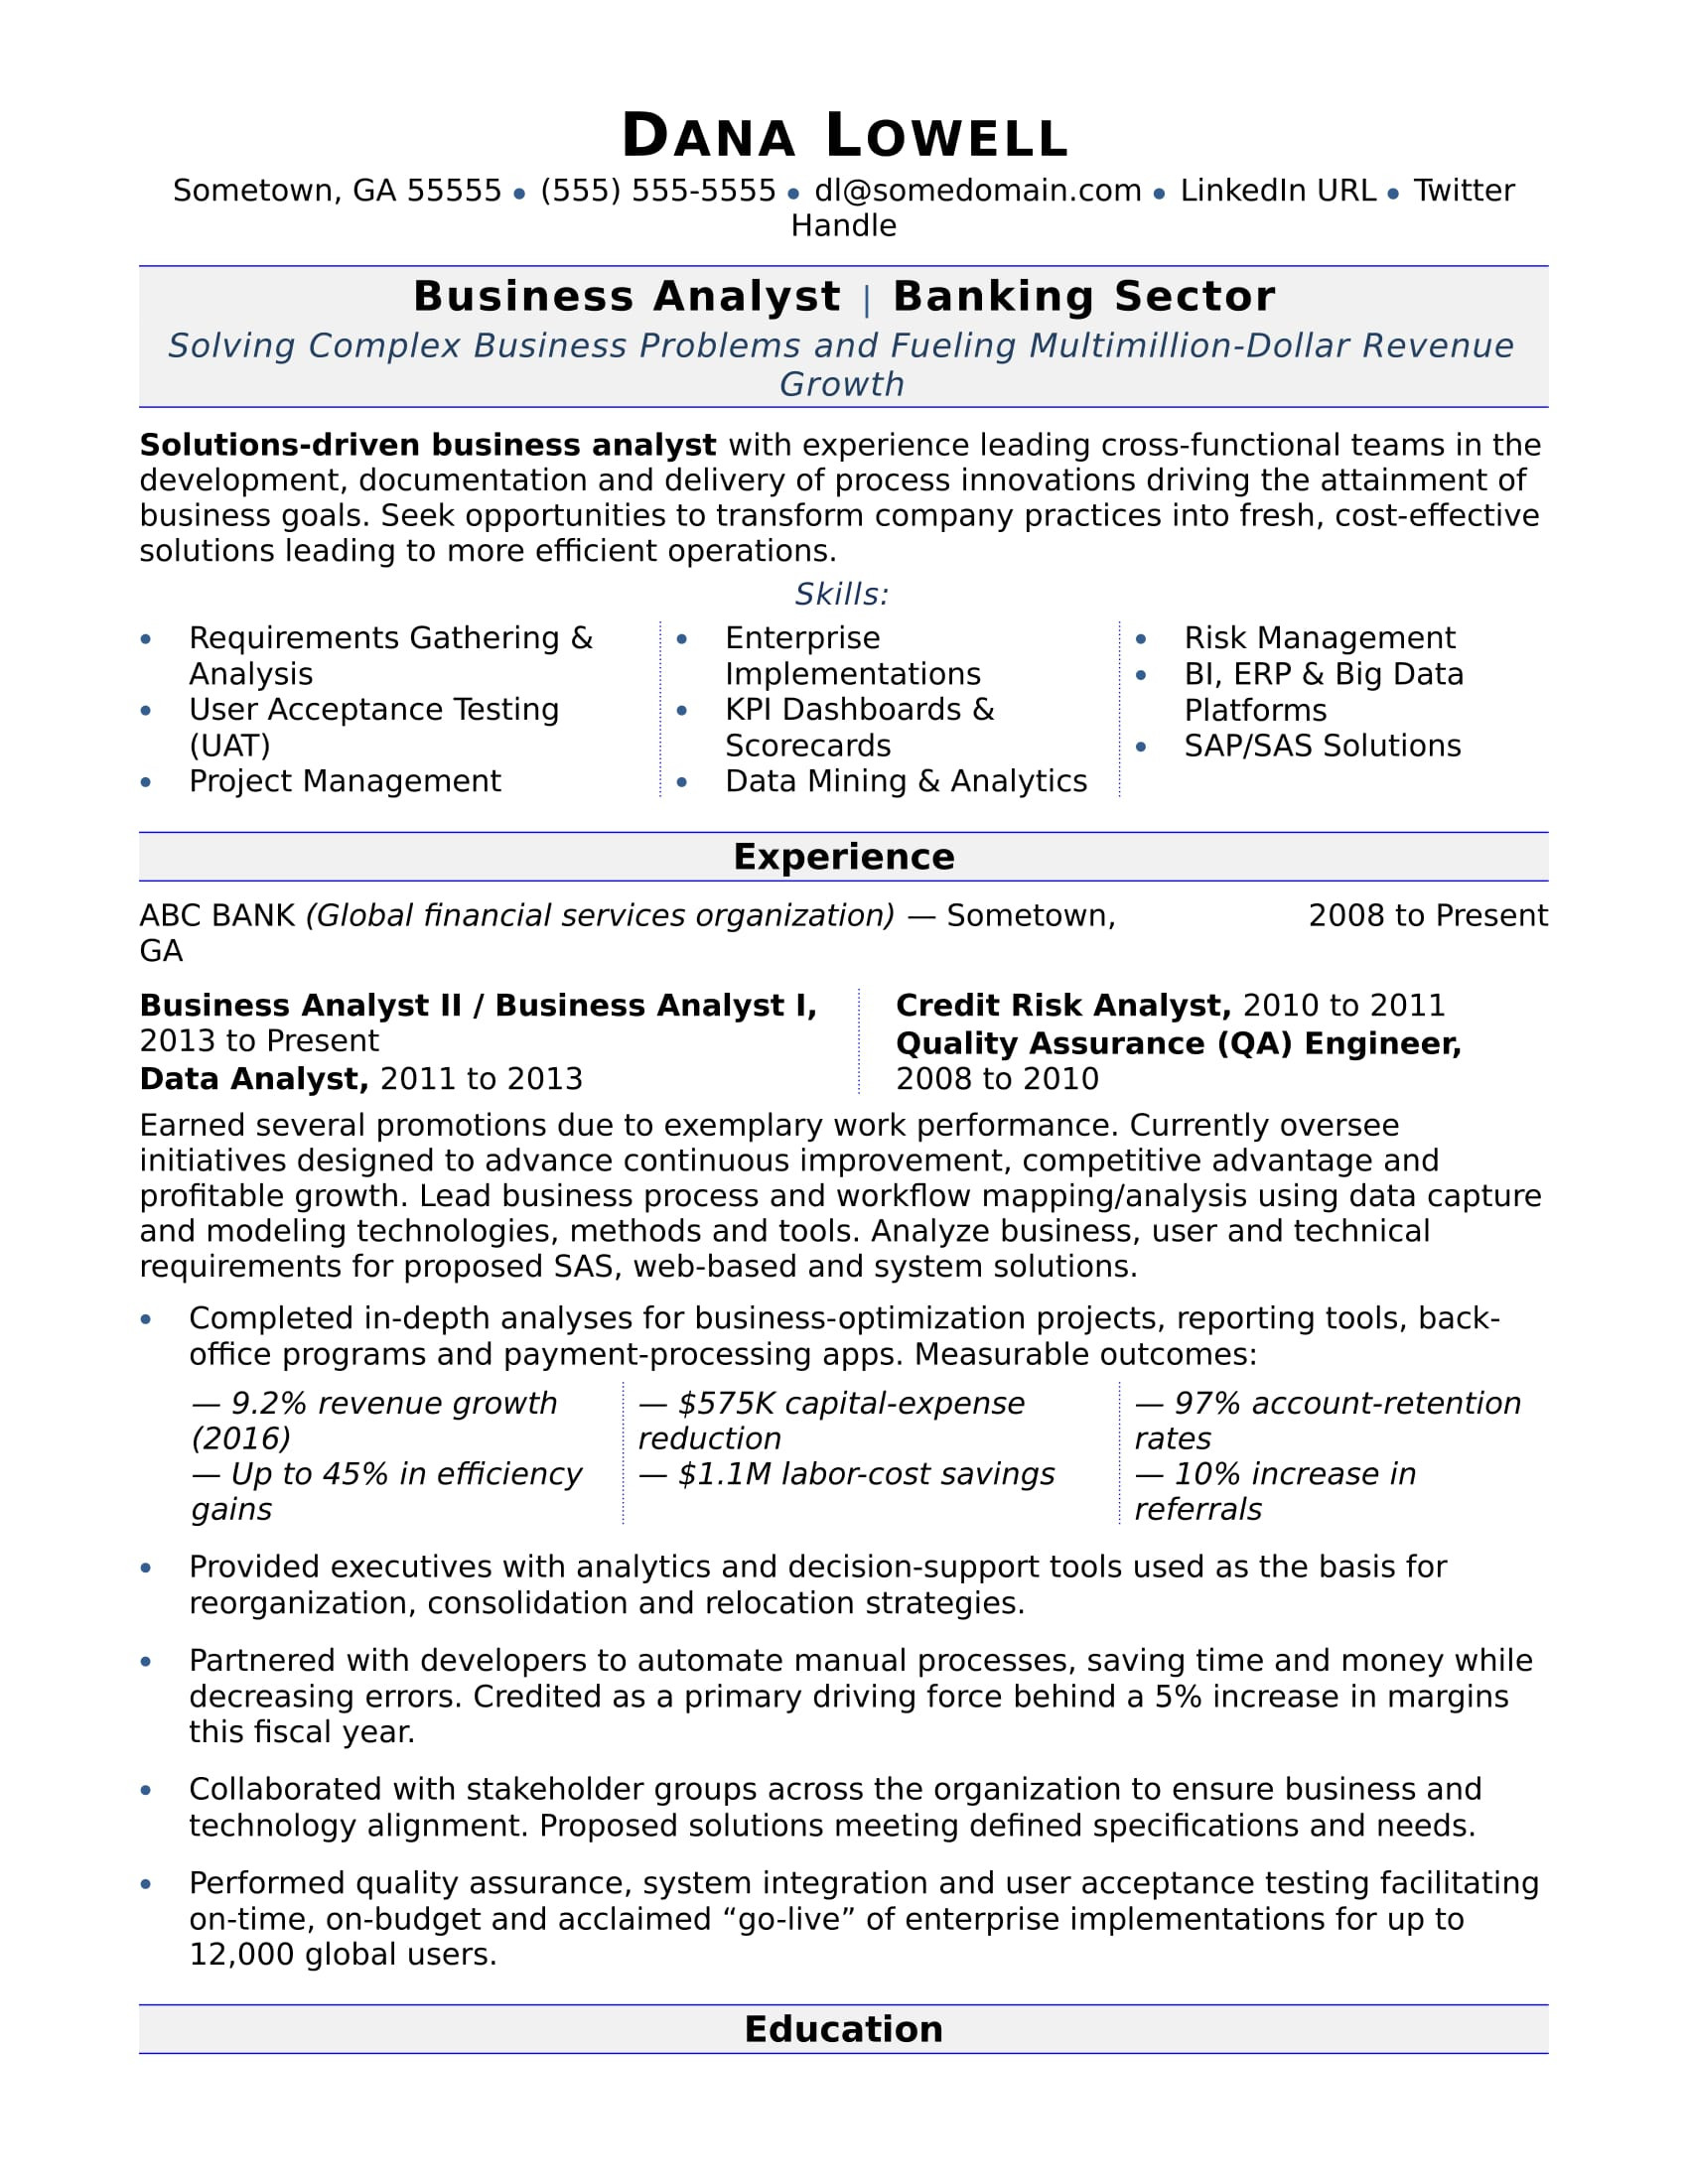 Sample Resume for Banking Business Analyst Business Analyst Resume Monster.com